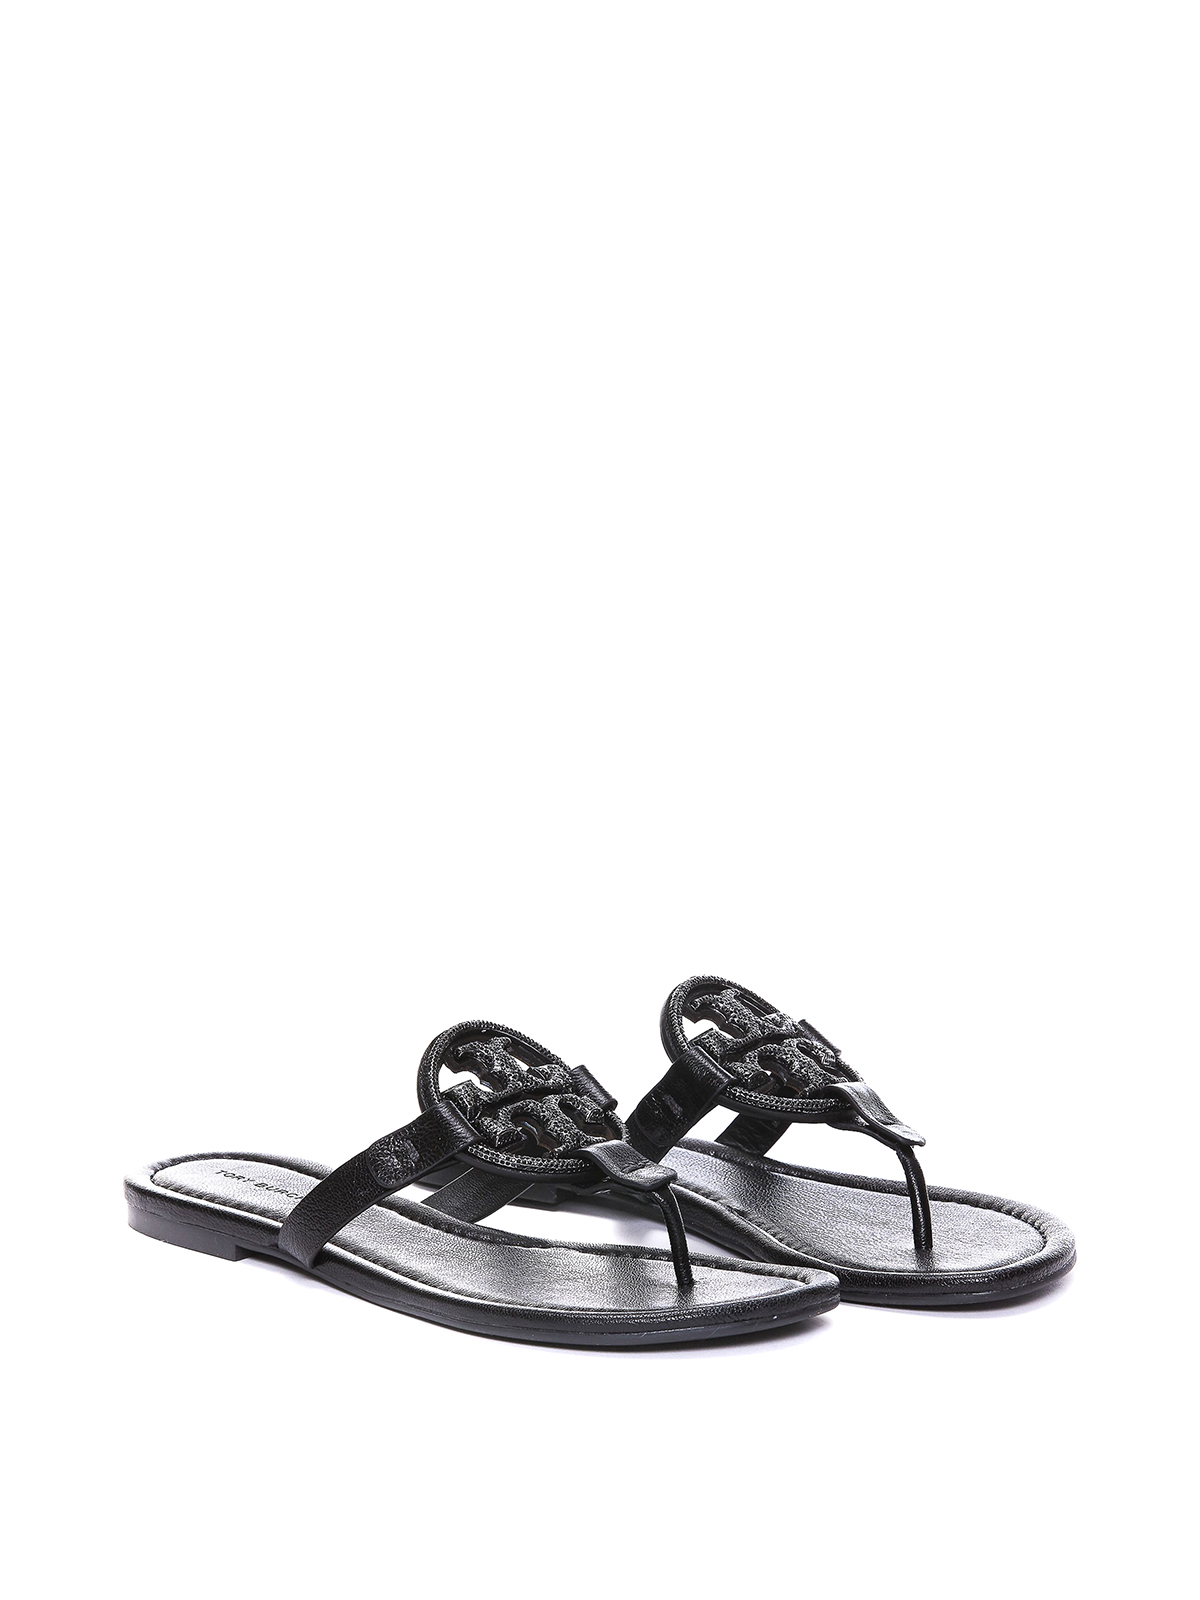 Sandals Tory Burch - Leather sandals - 145945006 | Shop online at iKRIX